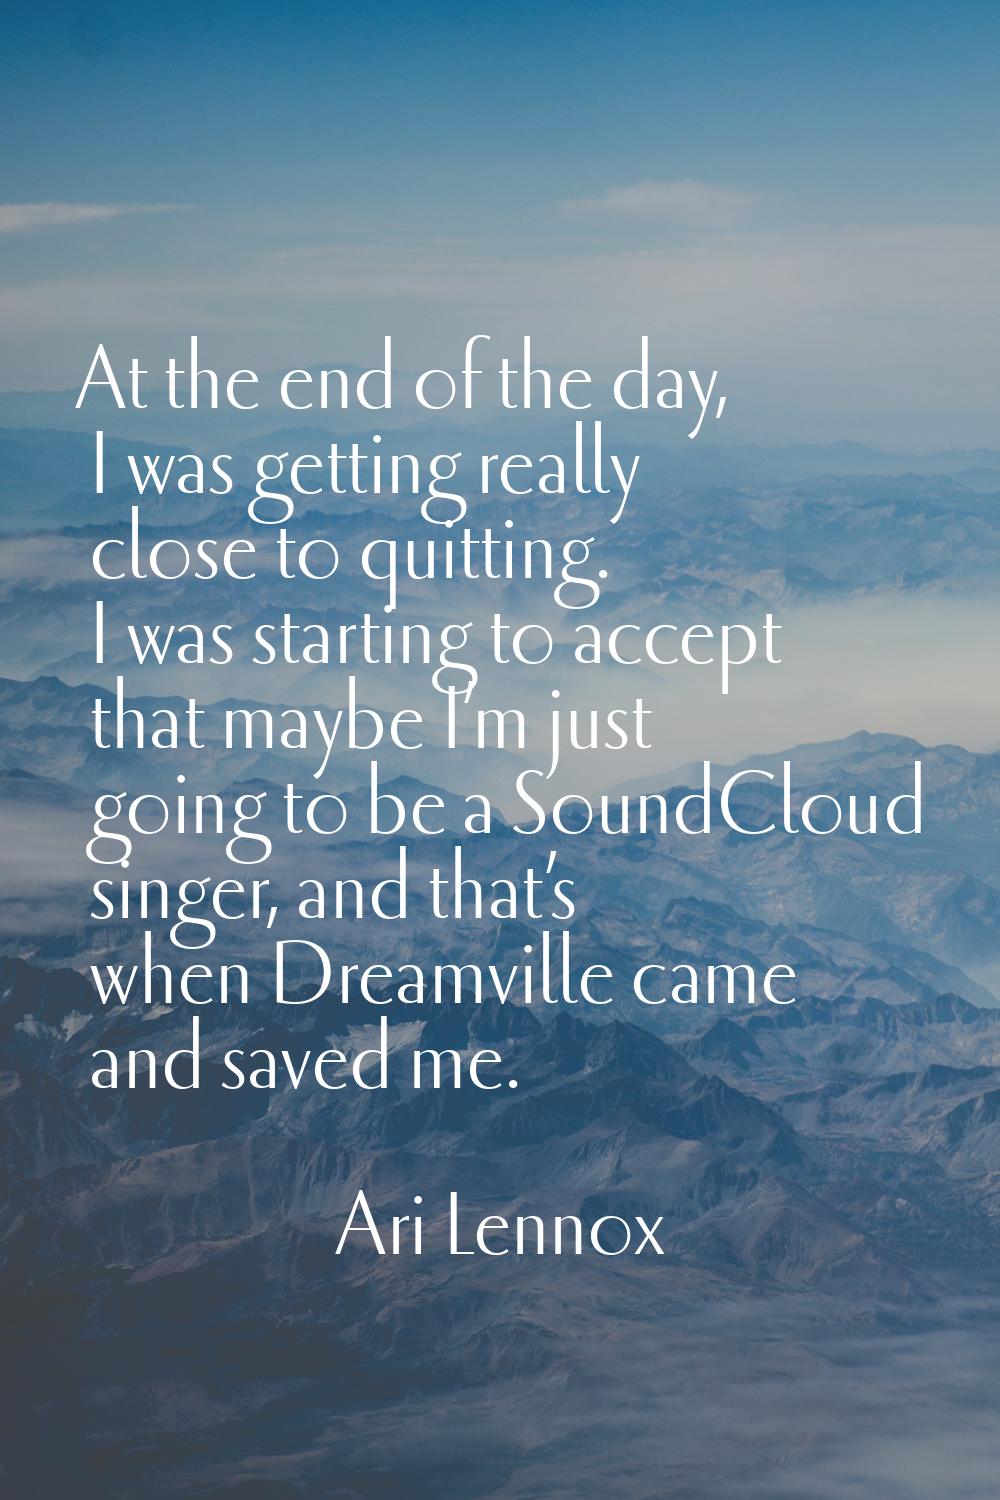 At the end of the day, I was getting really close to quitting. I was starting to accept that maybe 